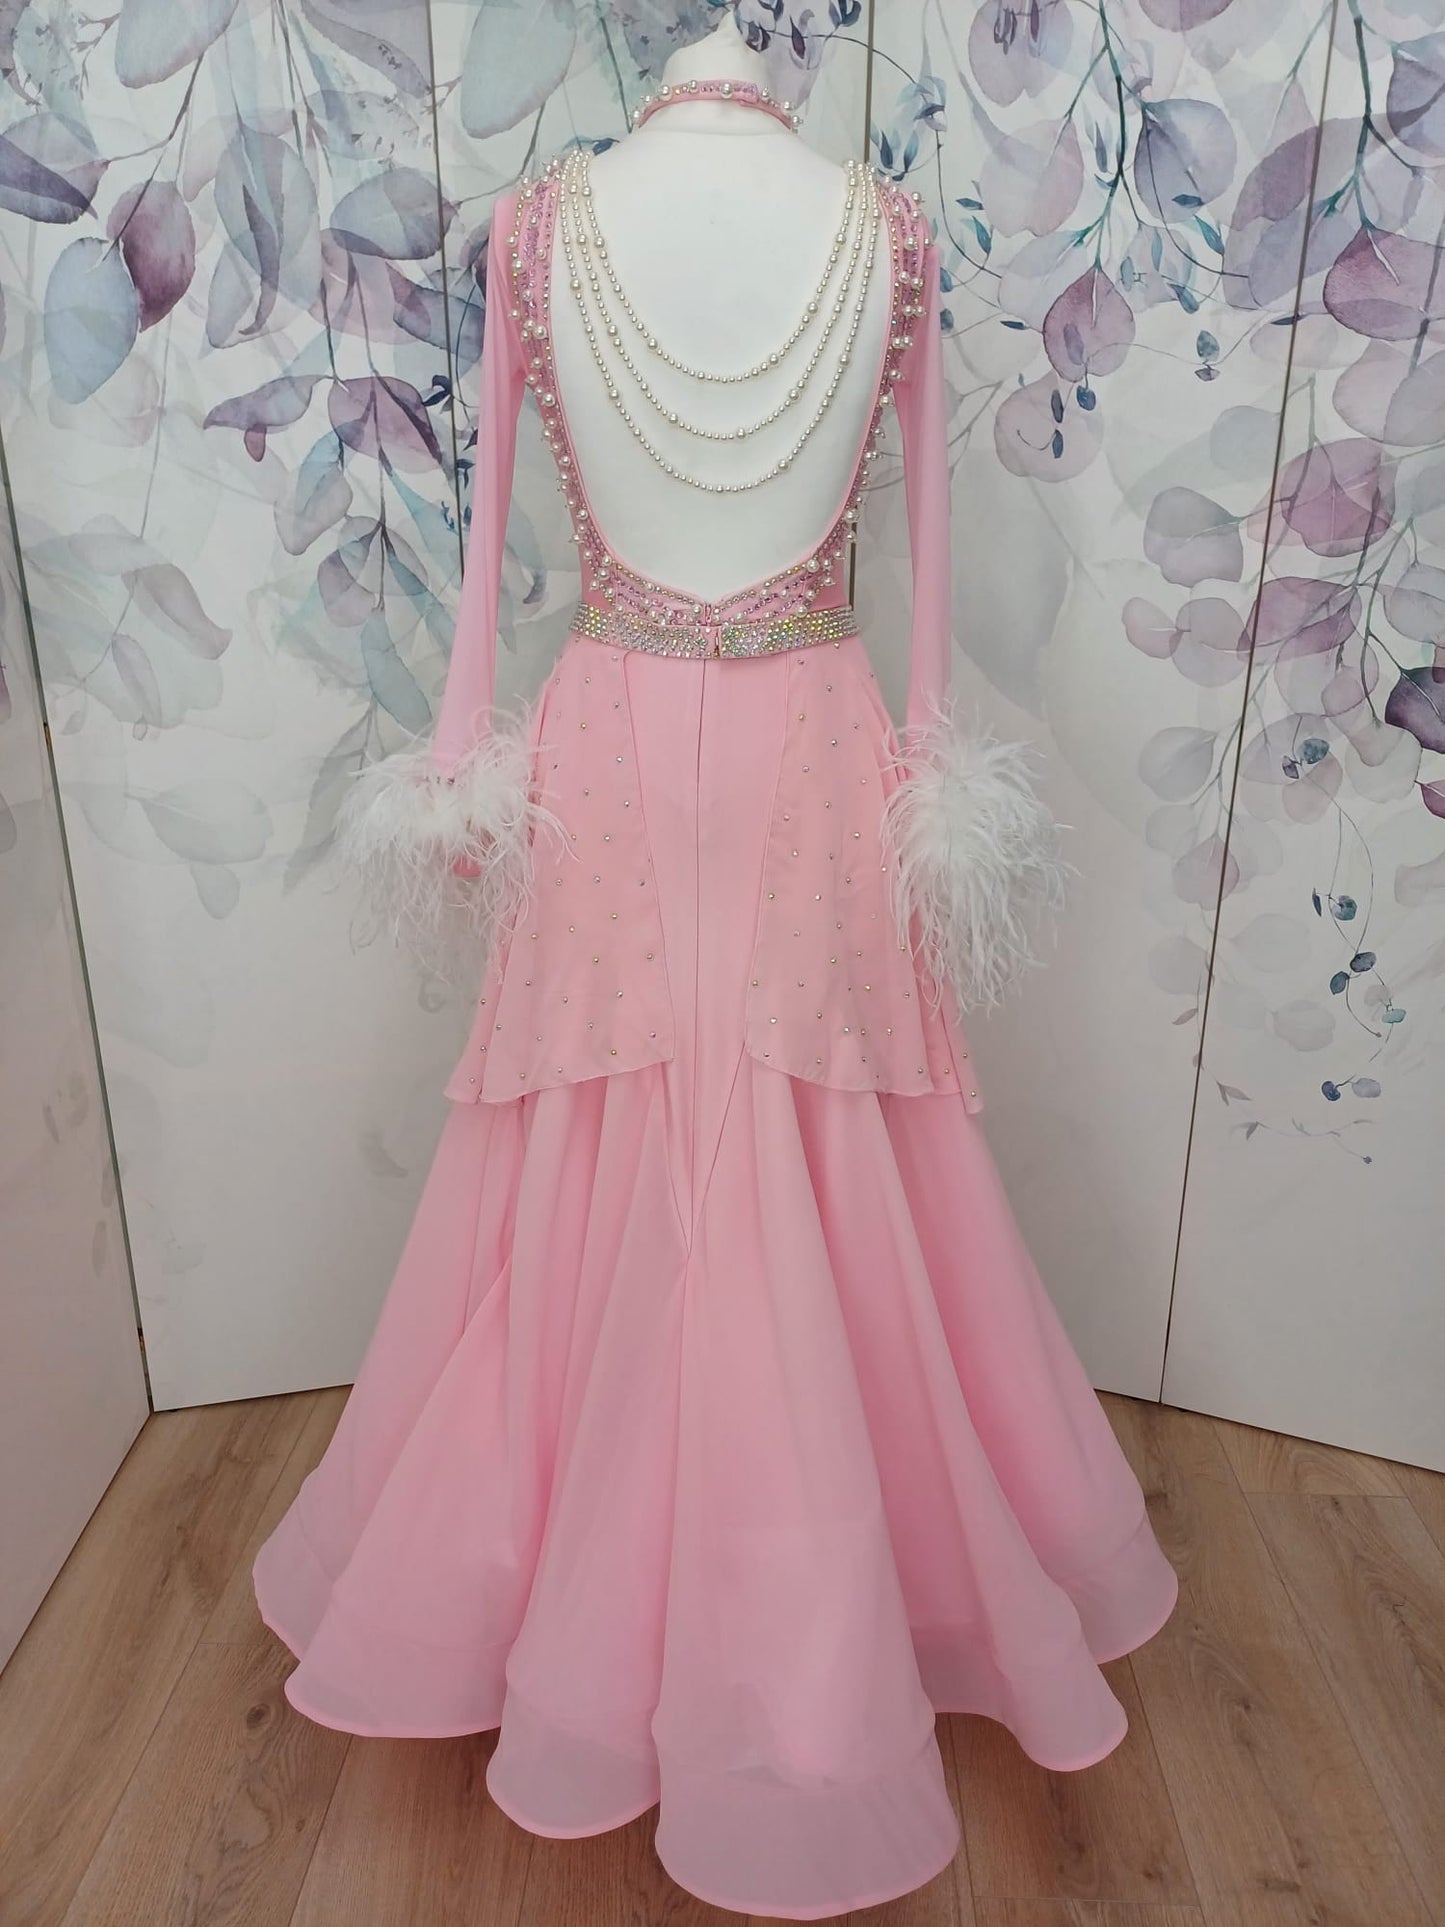 226 Pale Pink Ballroom/Smooth Dress. Decorated with Light Amethyst stones & pearls. Ostrich feather cuffs and drape decoration to the waist area front & back